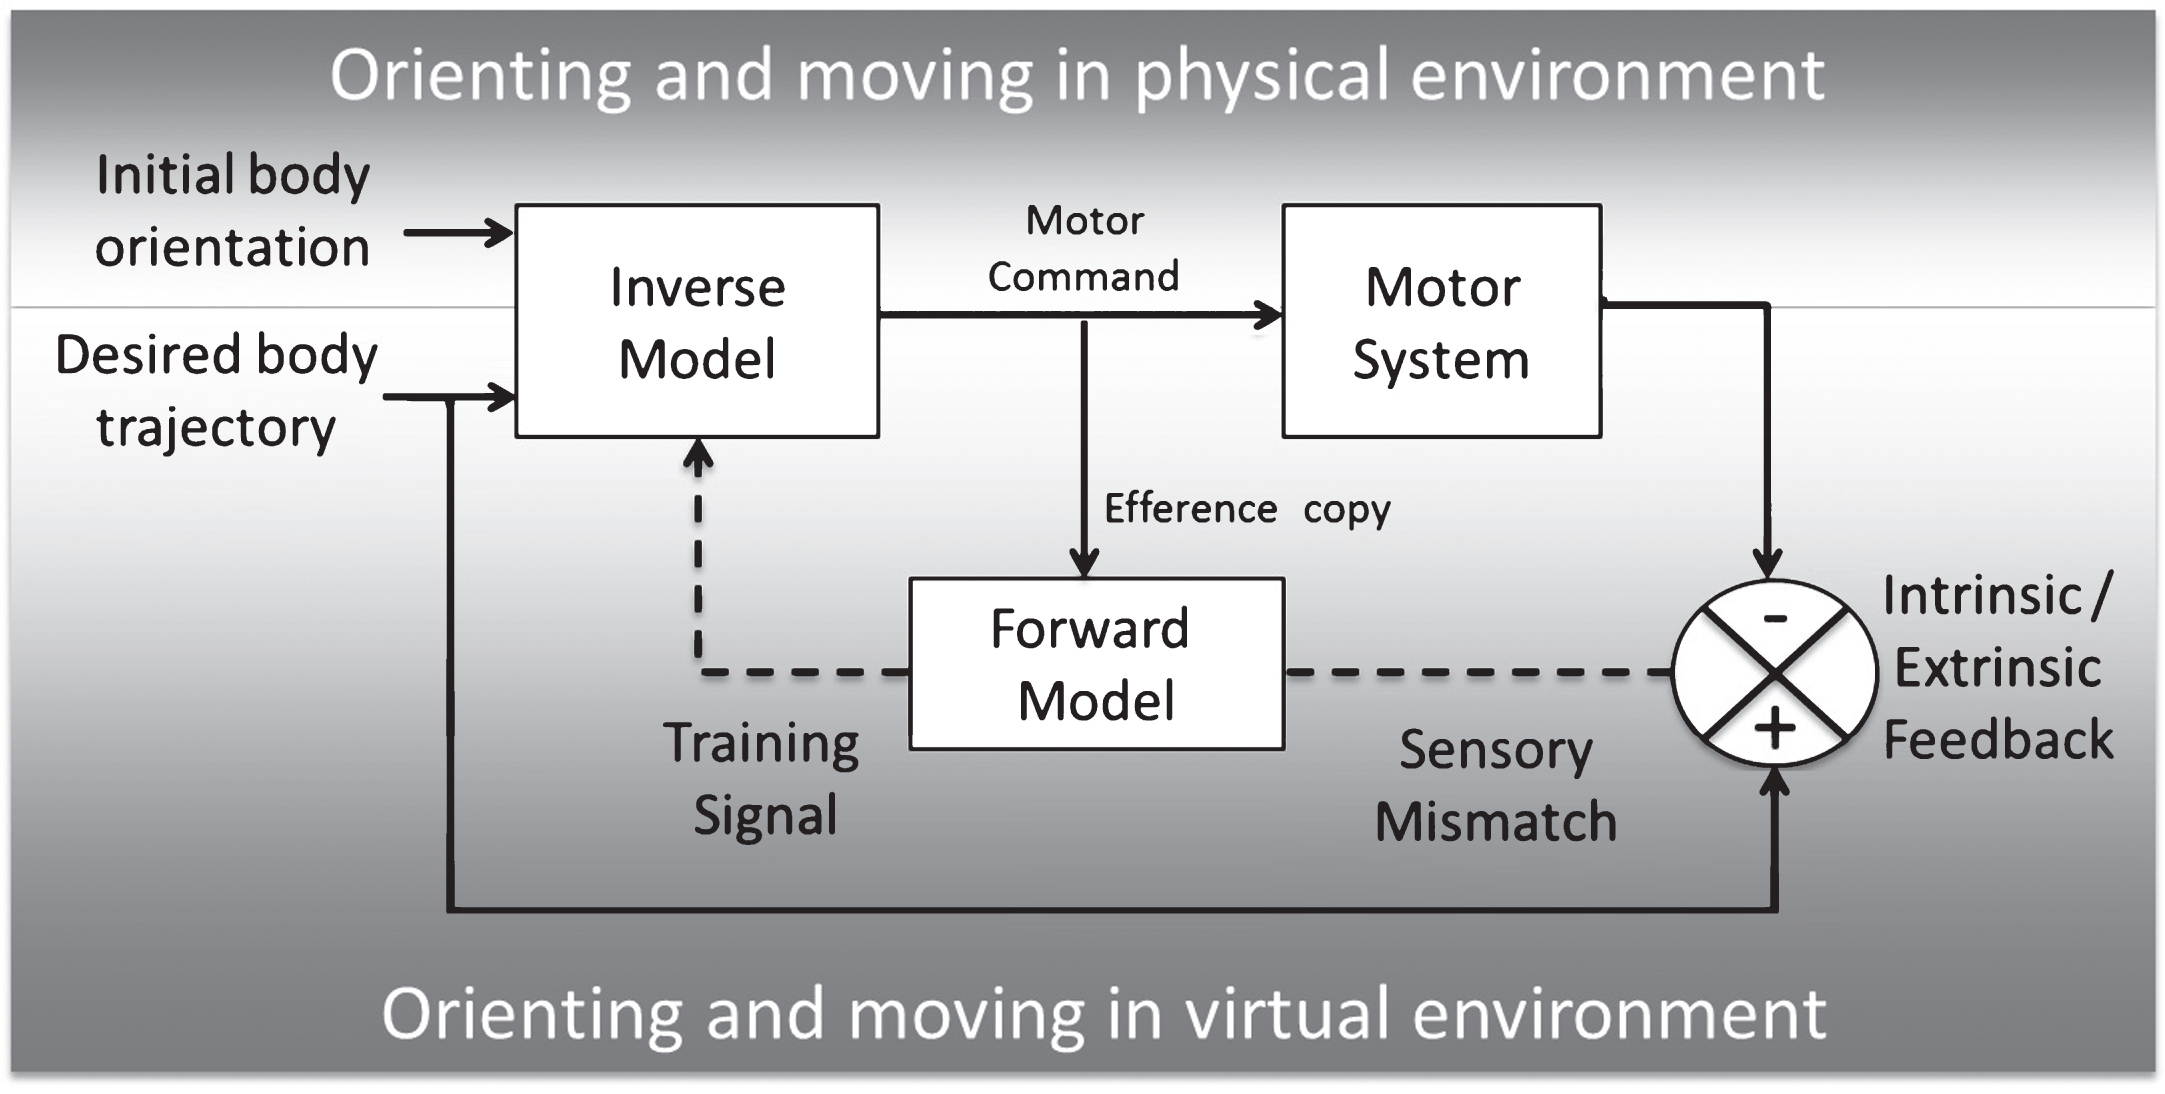 Model of forward and inverse learning in physical and virtual environments, adapted from Miall and Wolpert [25].